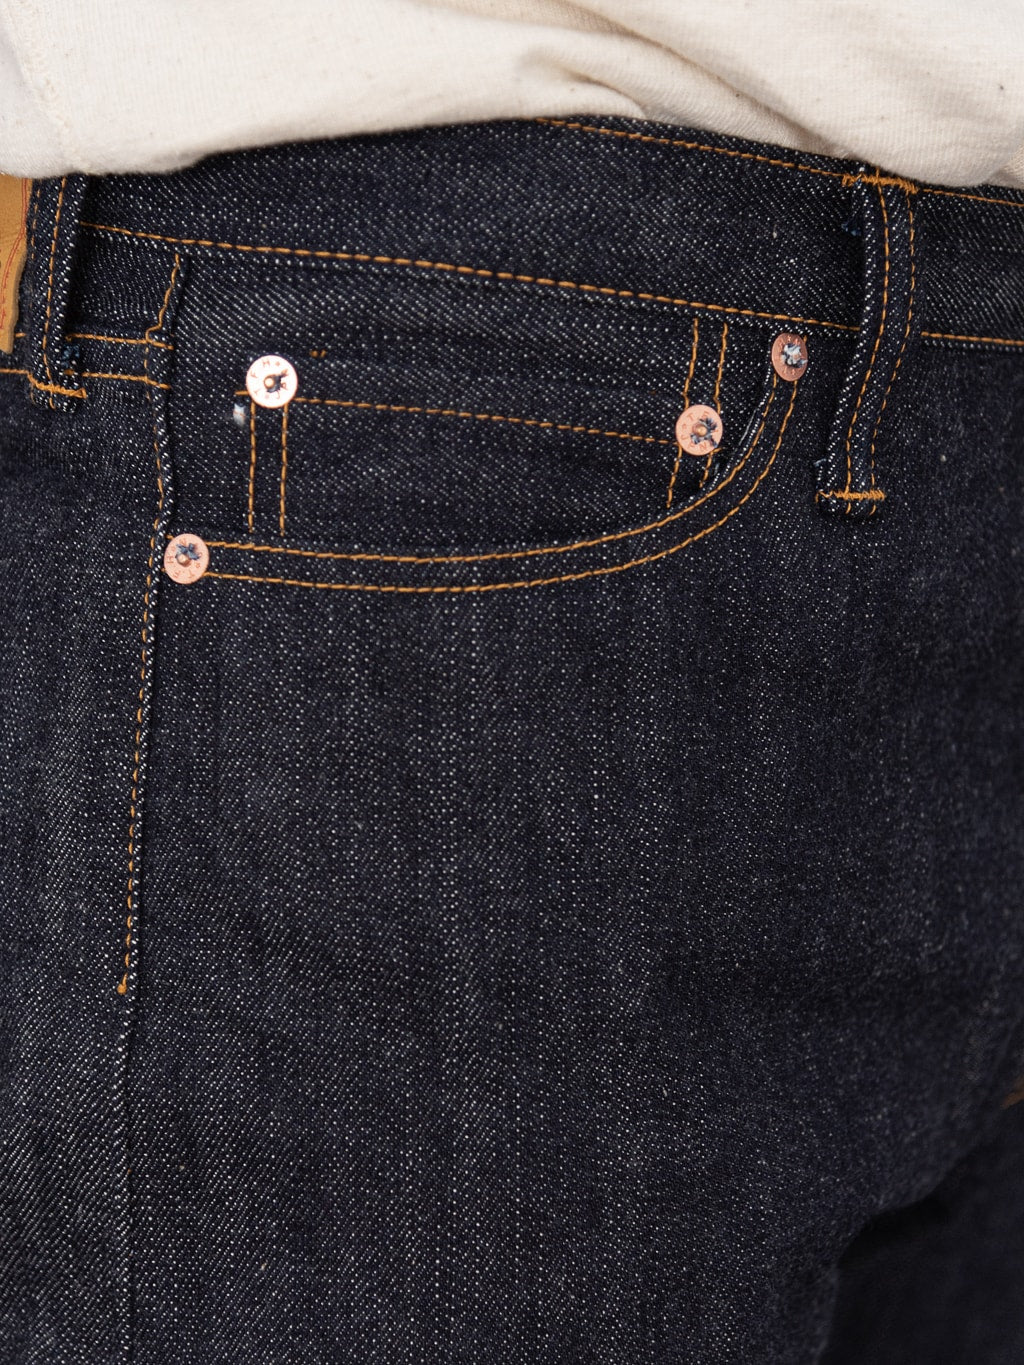 The Flat Head 3009 14.5oz Straight Tapered Jeans